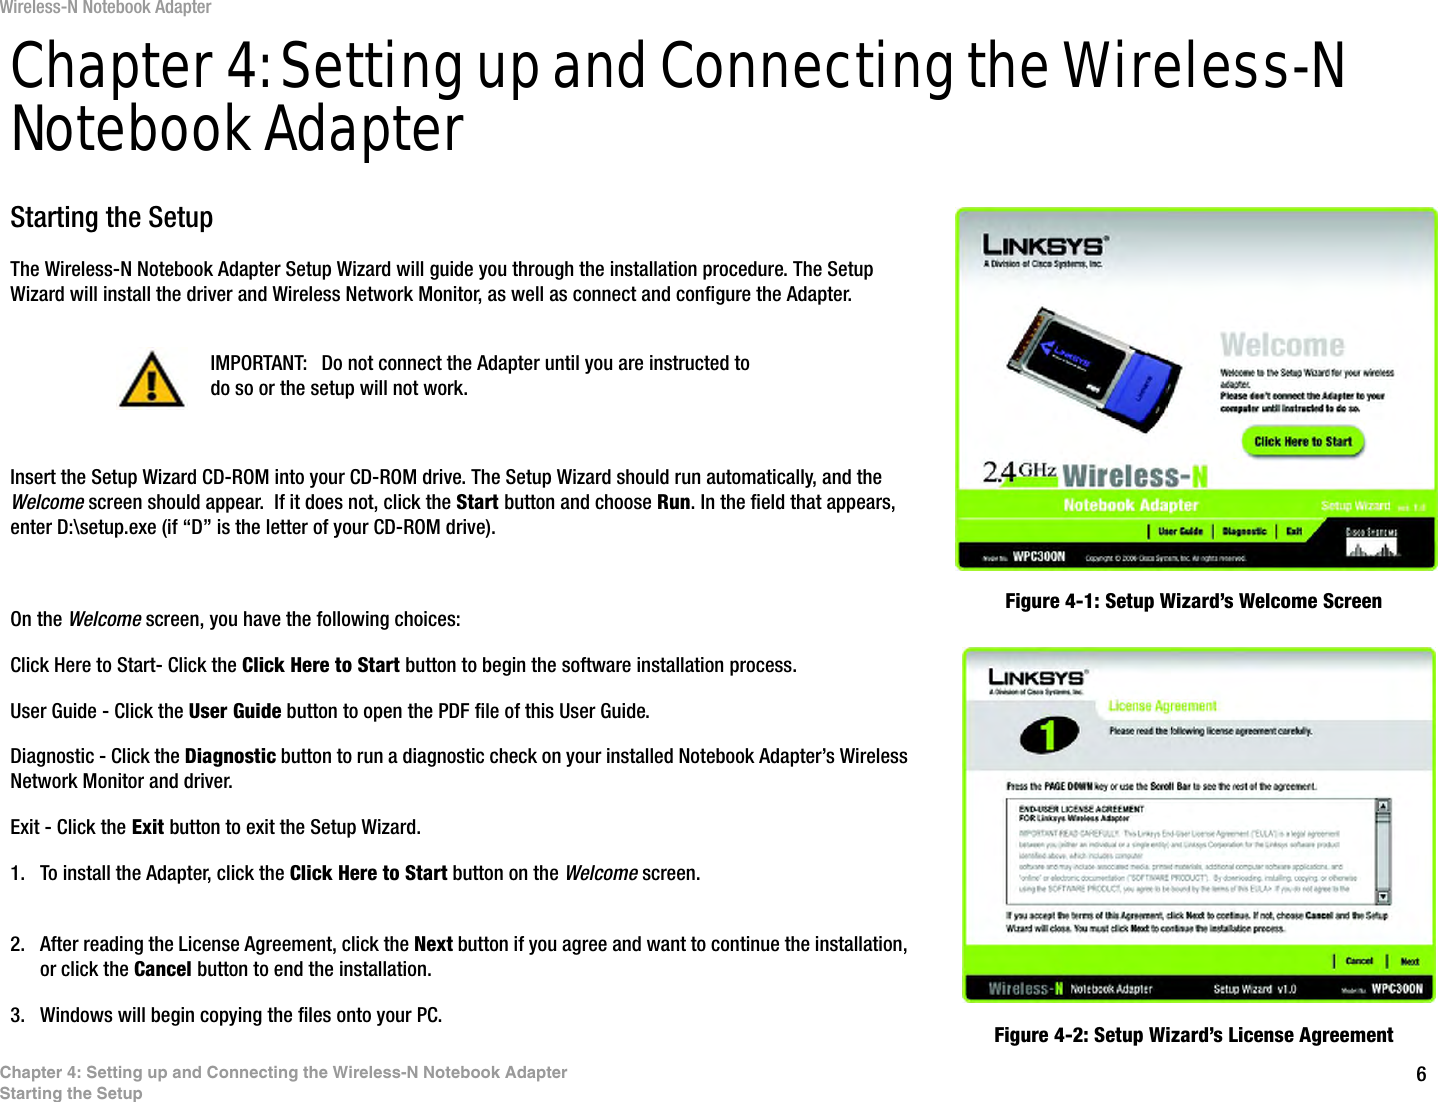 6Chapter 4: Setting up and Connecting the Wireless-N Notebook AdapterStarting the SetupWireless-N Notebook AdapterChapter 4: Setting up and Connecting the Wireless-N Notebook AdapterStarting the SetupThe Wireless-N Notebook Adapter Setup Wizard will guide you through the installation procedure. The Setup Wizard will install the driver and Wireless Network Monitor, as well as connect and configure the Adapter.Insert the Setup Wizard CD-ROM into your CD-ROM drive. The Setup Wizard should run automatically, and the Welcome screen should appear.  If it does not, click the Start button and choose Run. In the field that appears, enter D:\setup.exe (if “D” is the letter of your CD-ROM drive). On the Welcome screen, you have the following choices:Click Here to Start- Click the Click Here to Start button to begin the software installation process. User Guide - Click the User Guide button to open the PDF file of this User Guide. Diagnostic - Click the Diagnostic button to run a diagnostic check on your installed Notebook Adapter’s Wireless Network Monitor and driver.Exit - Click the Exit button to exit the Setup Wizard.1. To install the Adapter, click the Click Here to Start button on the Welcome screen.2. After reading the License Agreement, click the Next button if you agree and want to continue the installation, or click the Cancel button to end the installation.3. Windows will begin copying the files onto your PC. Figure 4-1: Setup Wizard’s Welcome ScreenFigure 4-2: Setup Wizard’s License AgreementIMPORTANT: Do not connect the Adapter until you are instructed to do so or the setup will not work.